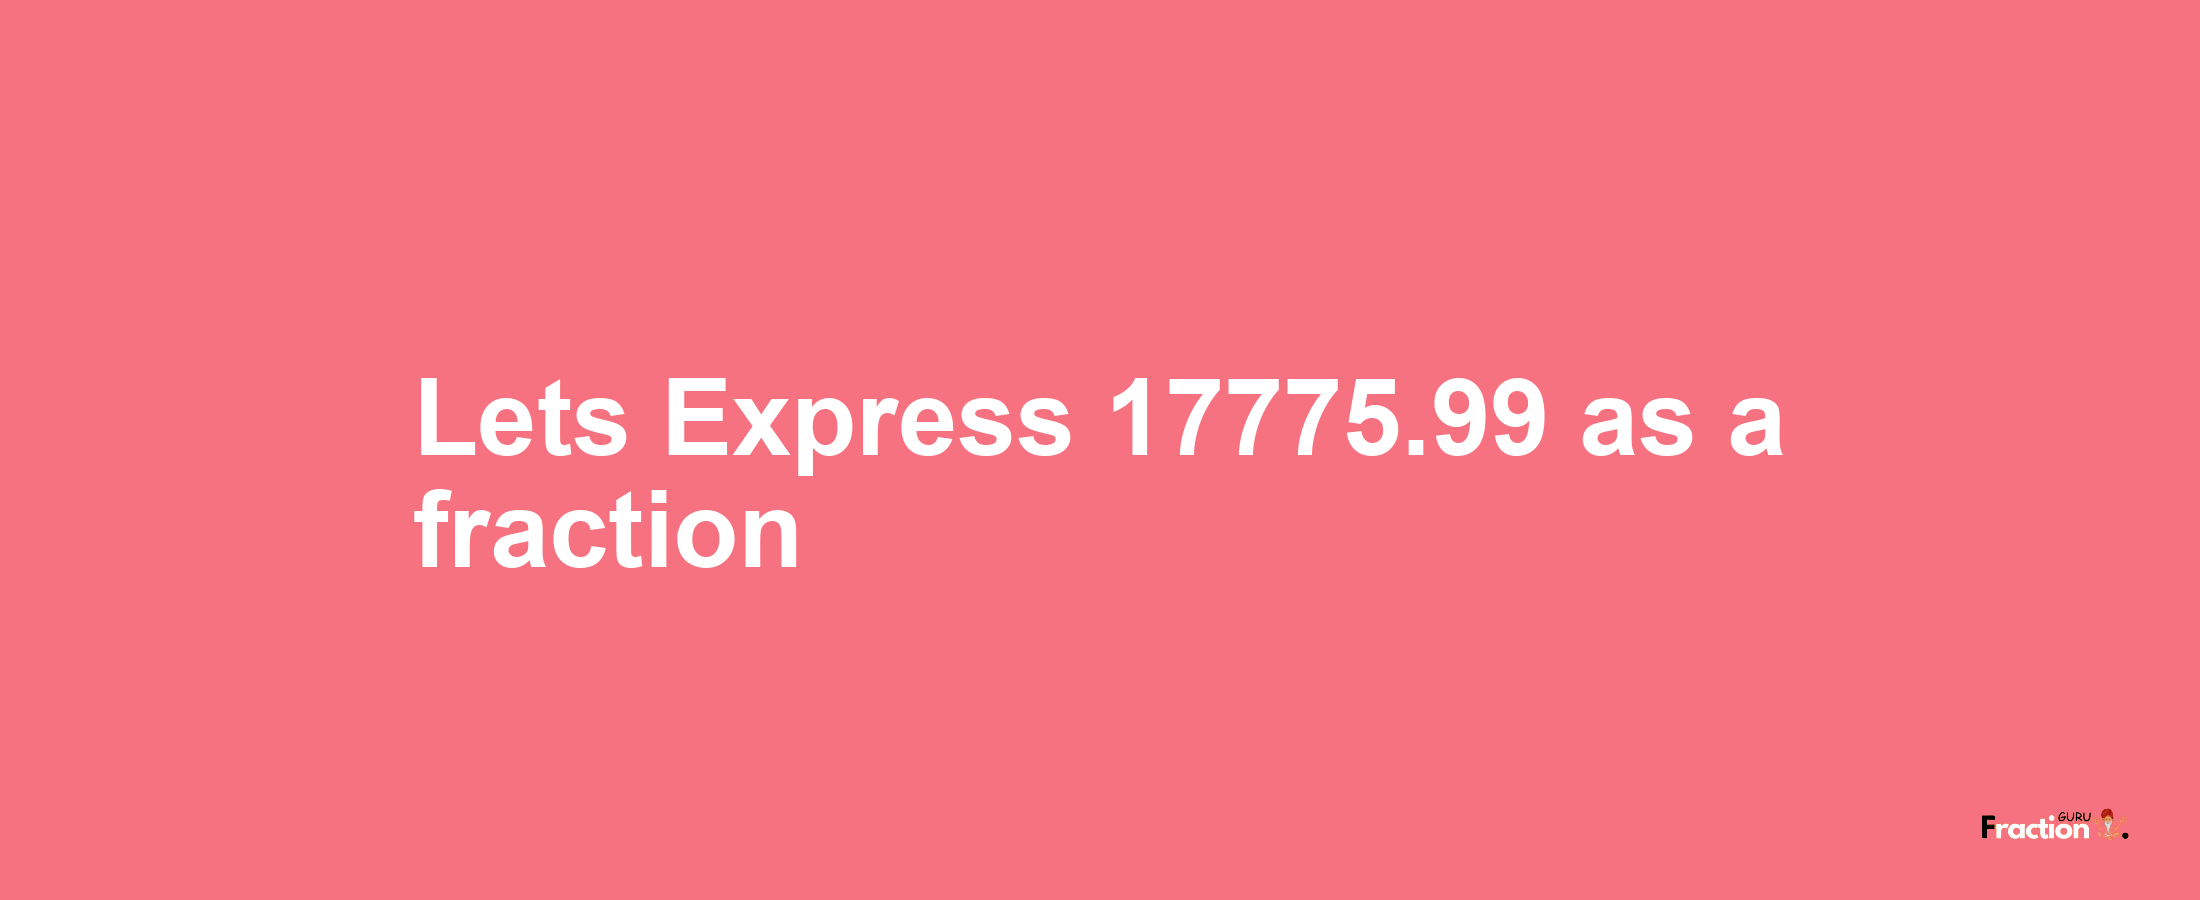 Lets Express 17775.99 as afraction